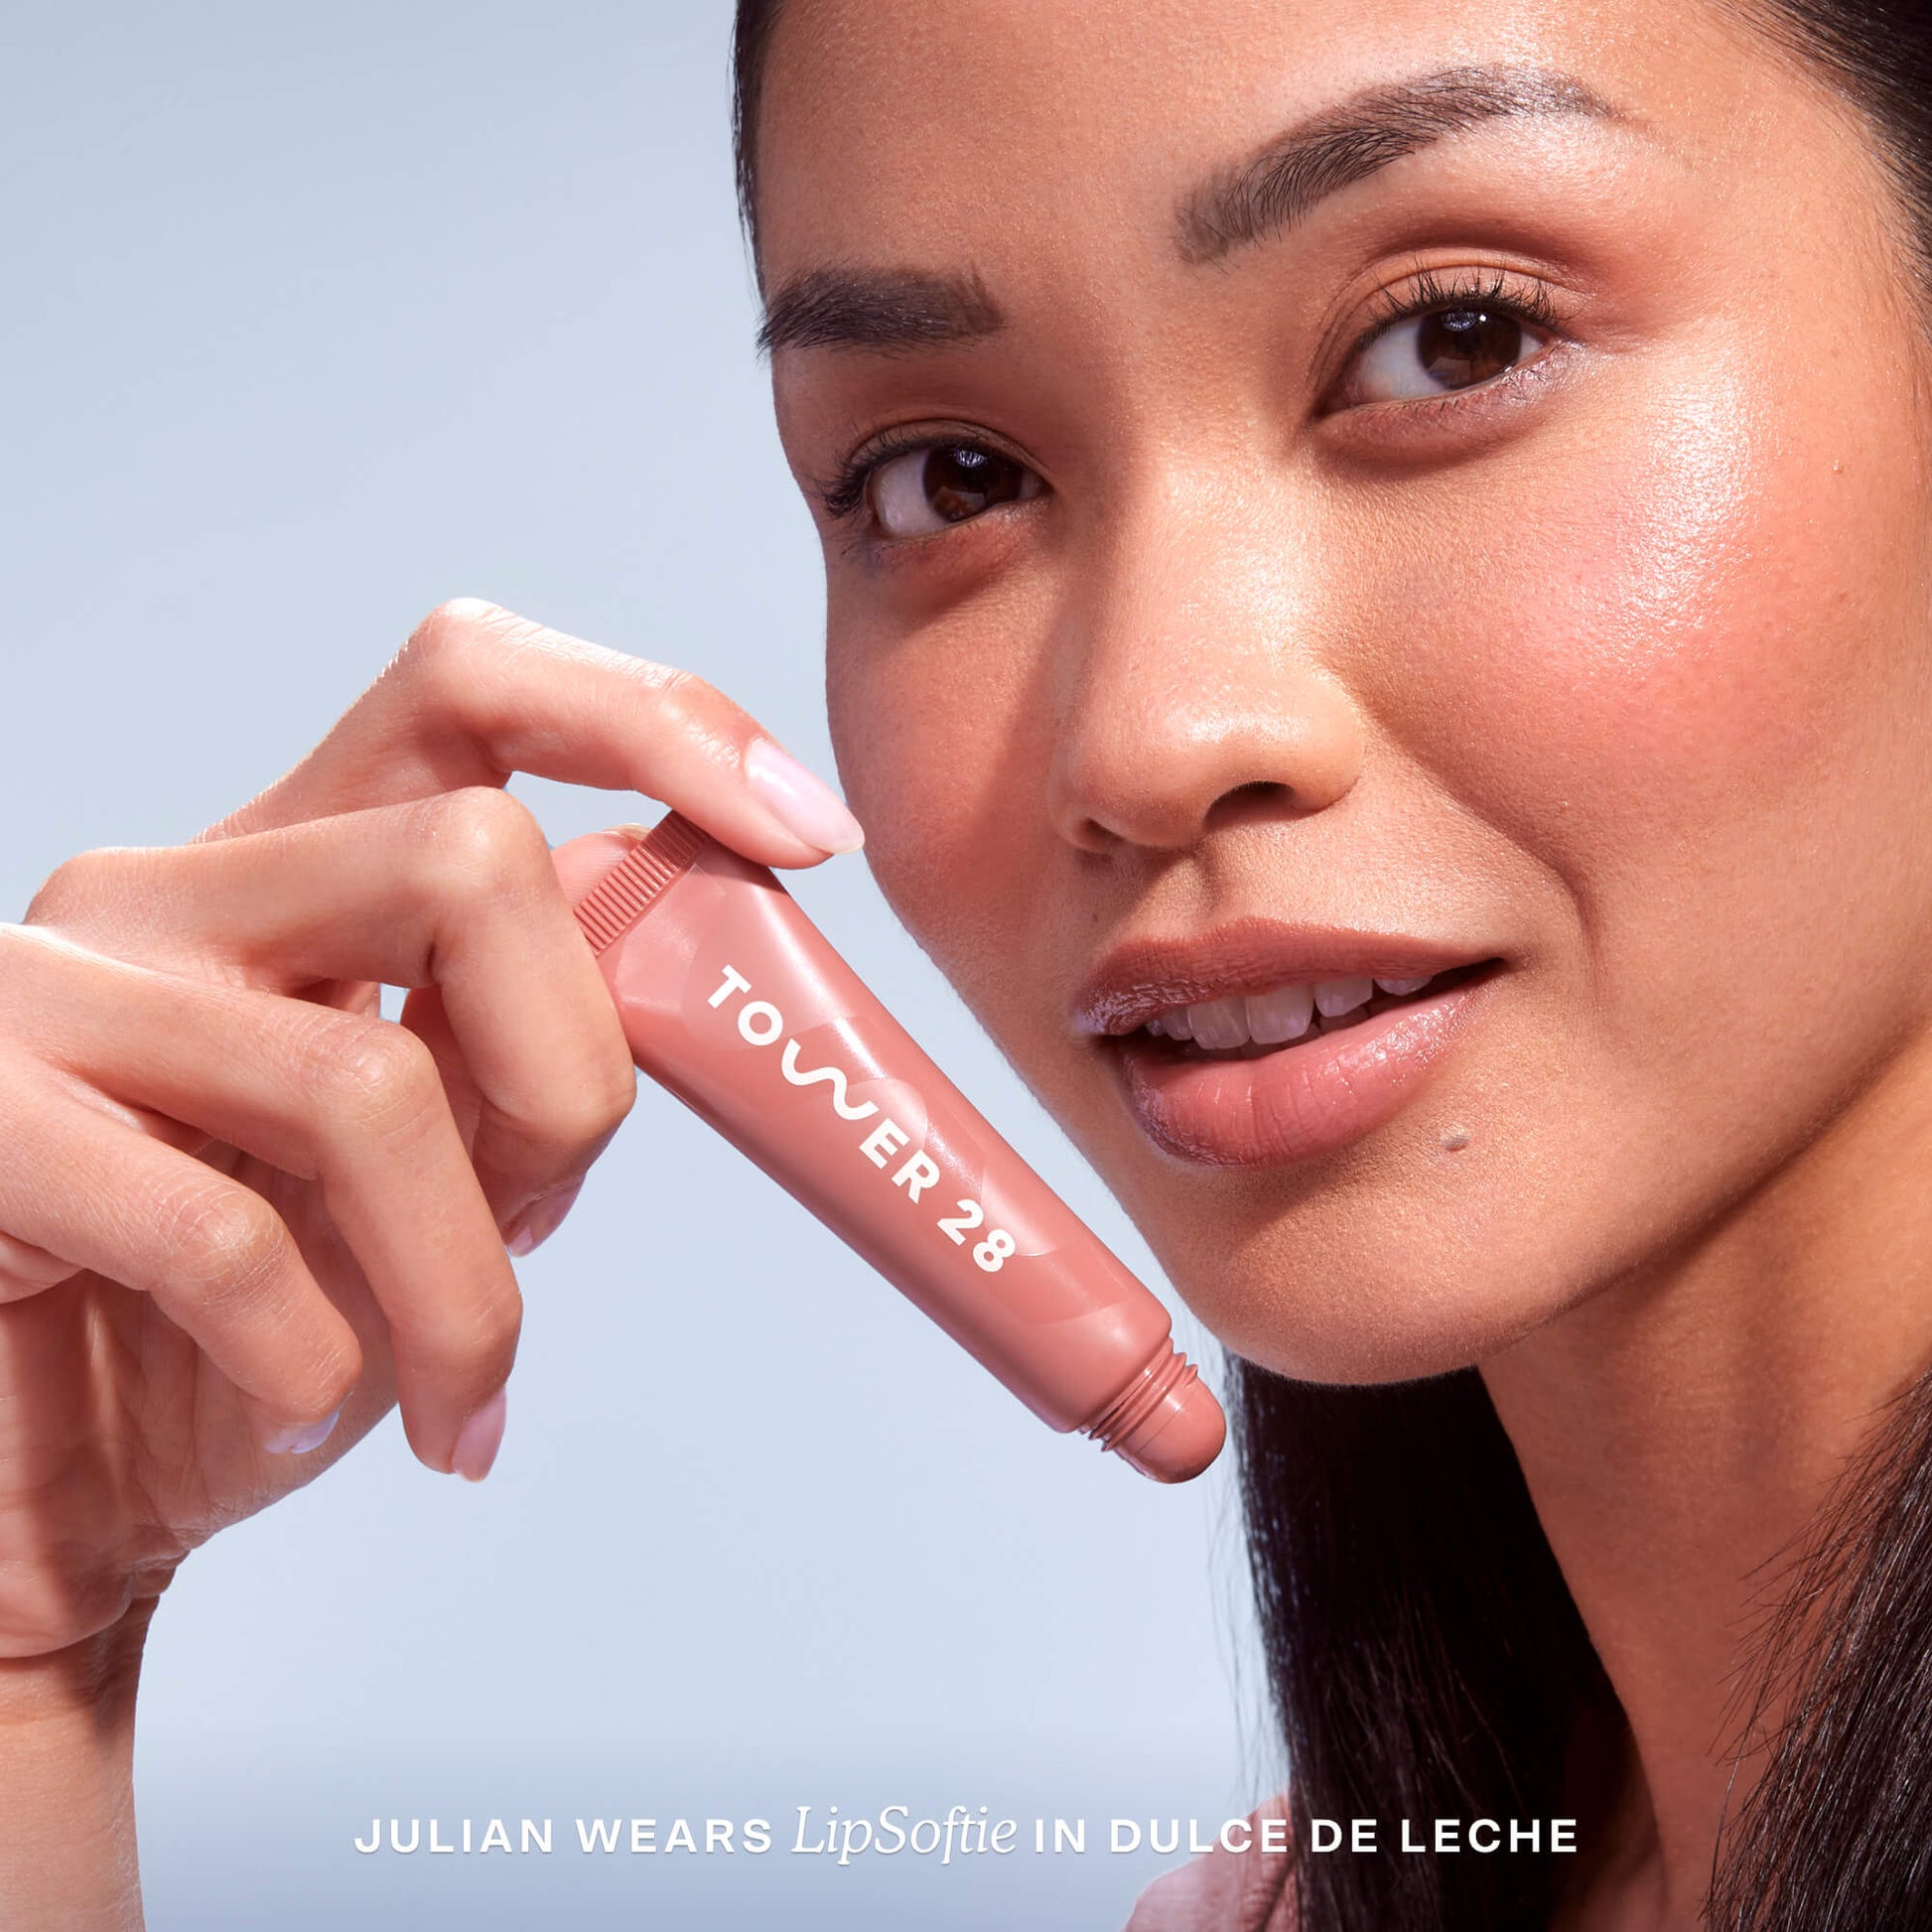 [Shared: A close up of a model holding Tower 28 Beauty's LipSoftie™ Lip Treatment in Dulce de Leche and wearing it on her lips